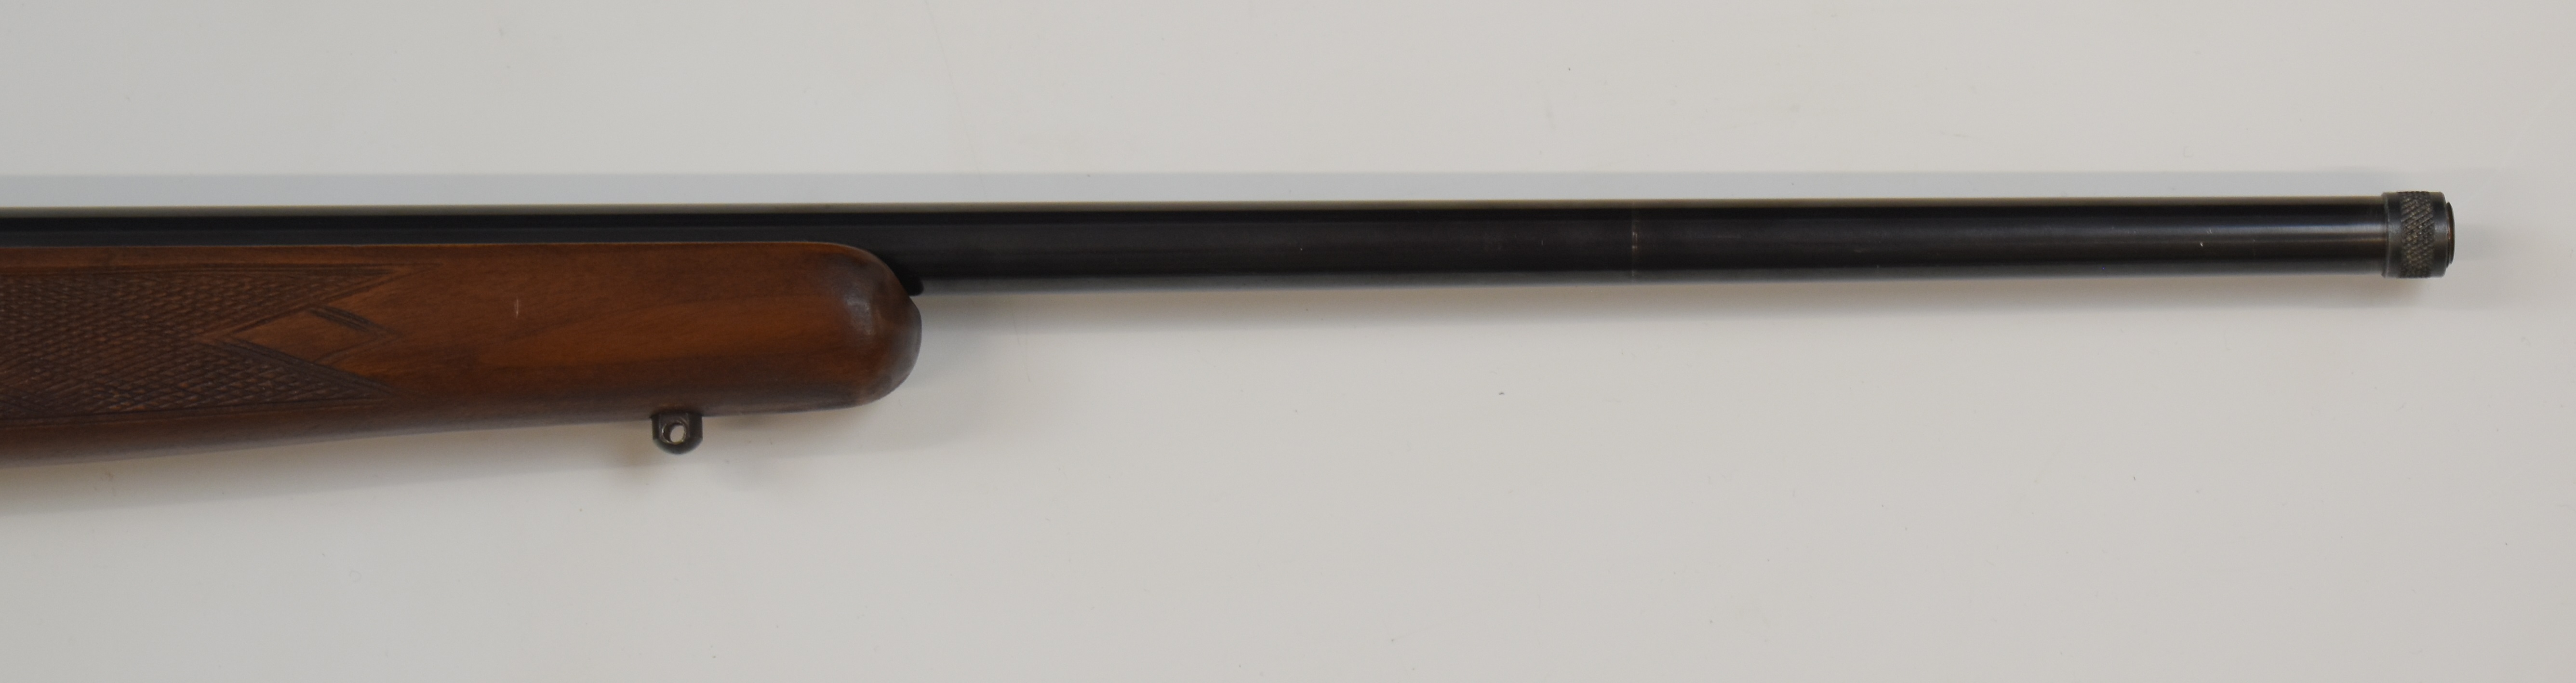 CZ 527 American .222 Remington bolt-action rifle with chequered semi-pistol grip and forend, sling - Image 5 of 10